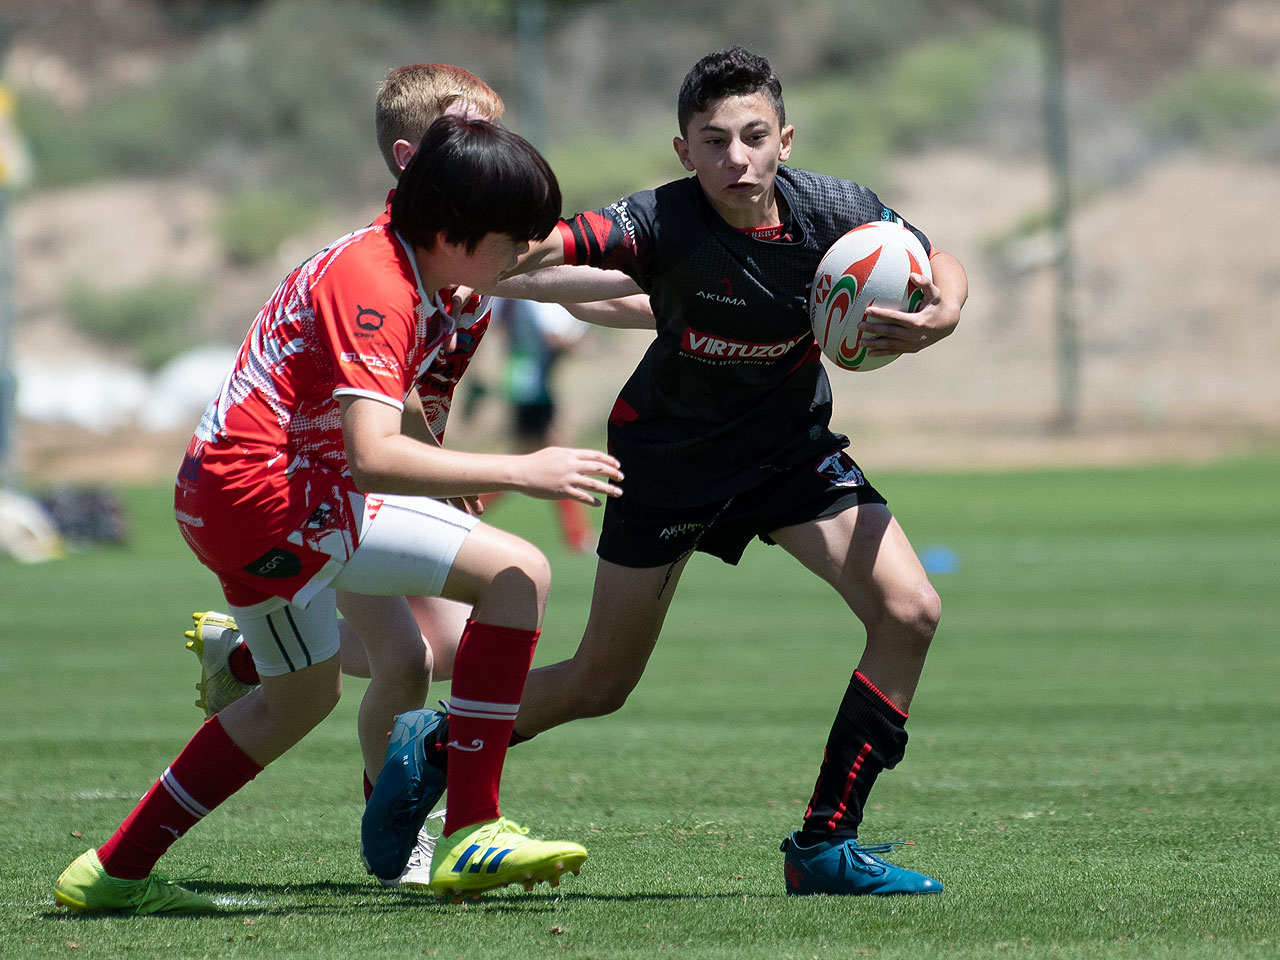 Exiles Under 12s take A-League title to wrap up a magnificent season ...